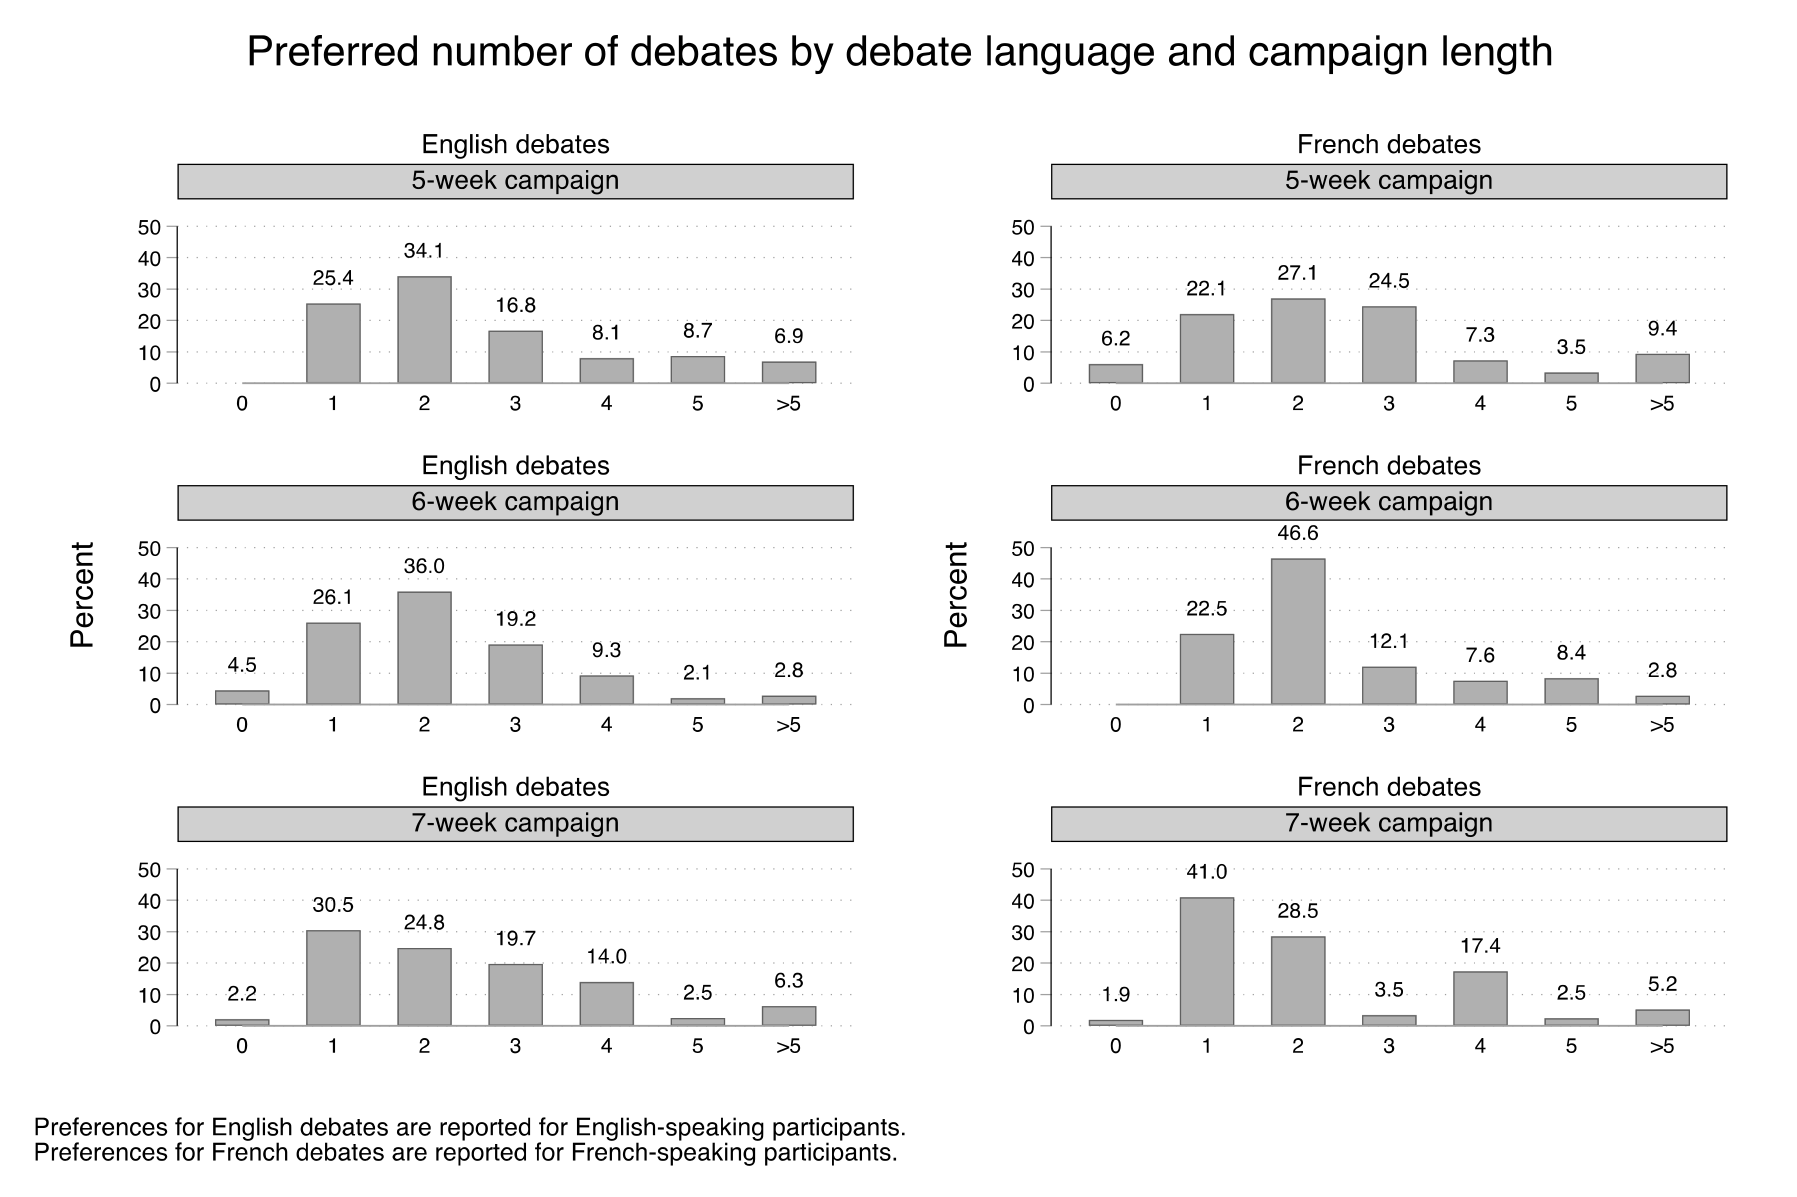 Figure 41. This figure shows participants' preferred number of English and French debates.  The results are disaggregated according to whether the participants answered in the context of a hypothetical 5-, 6-, or 7-week campaign.  Across conditions, we find that a majority of French speakers want two or more French debates and that a majority of English speakers want two or more English debates.